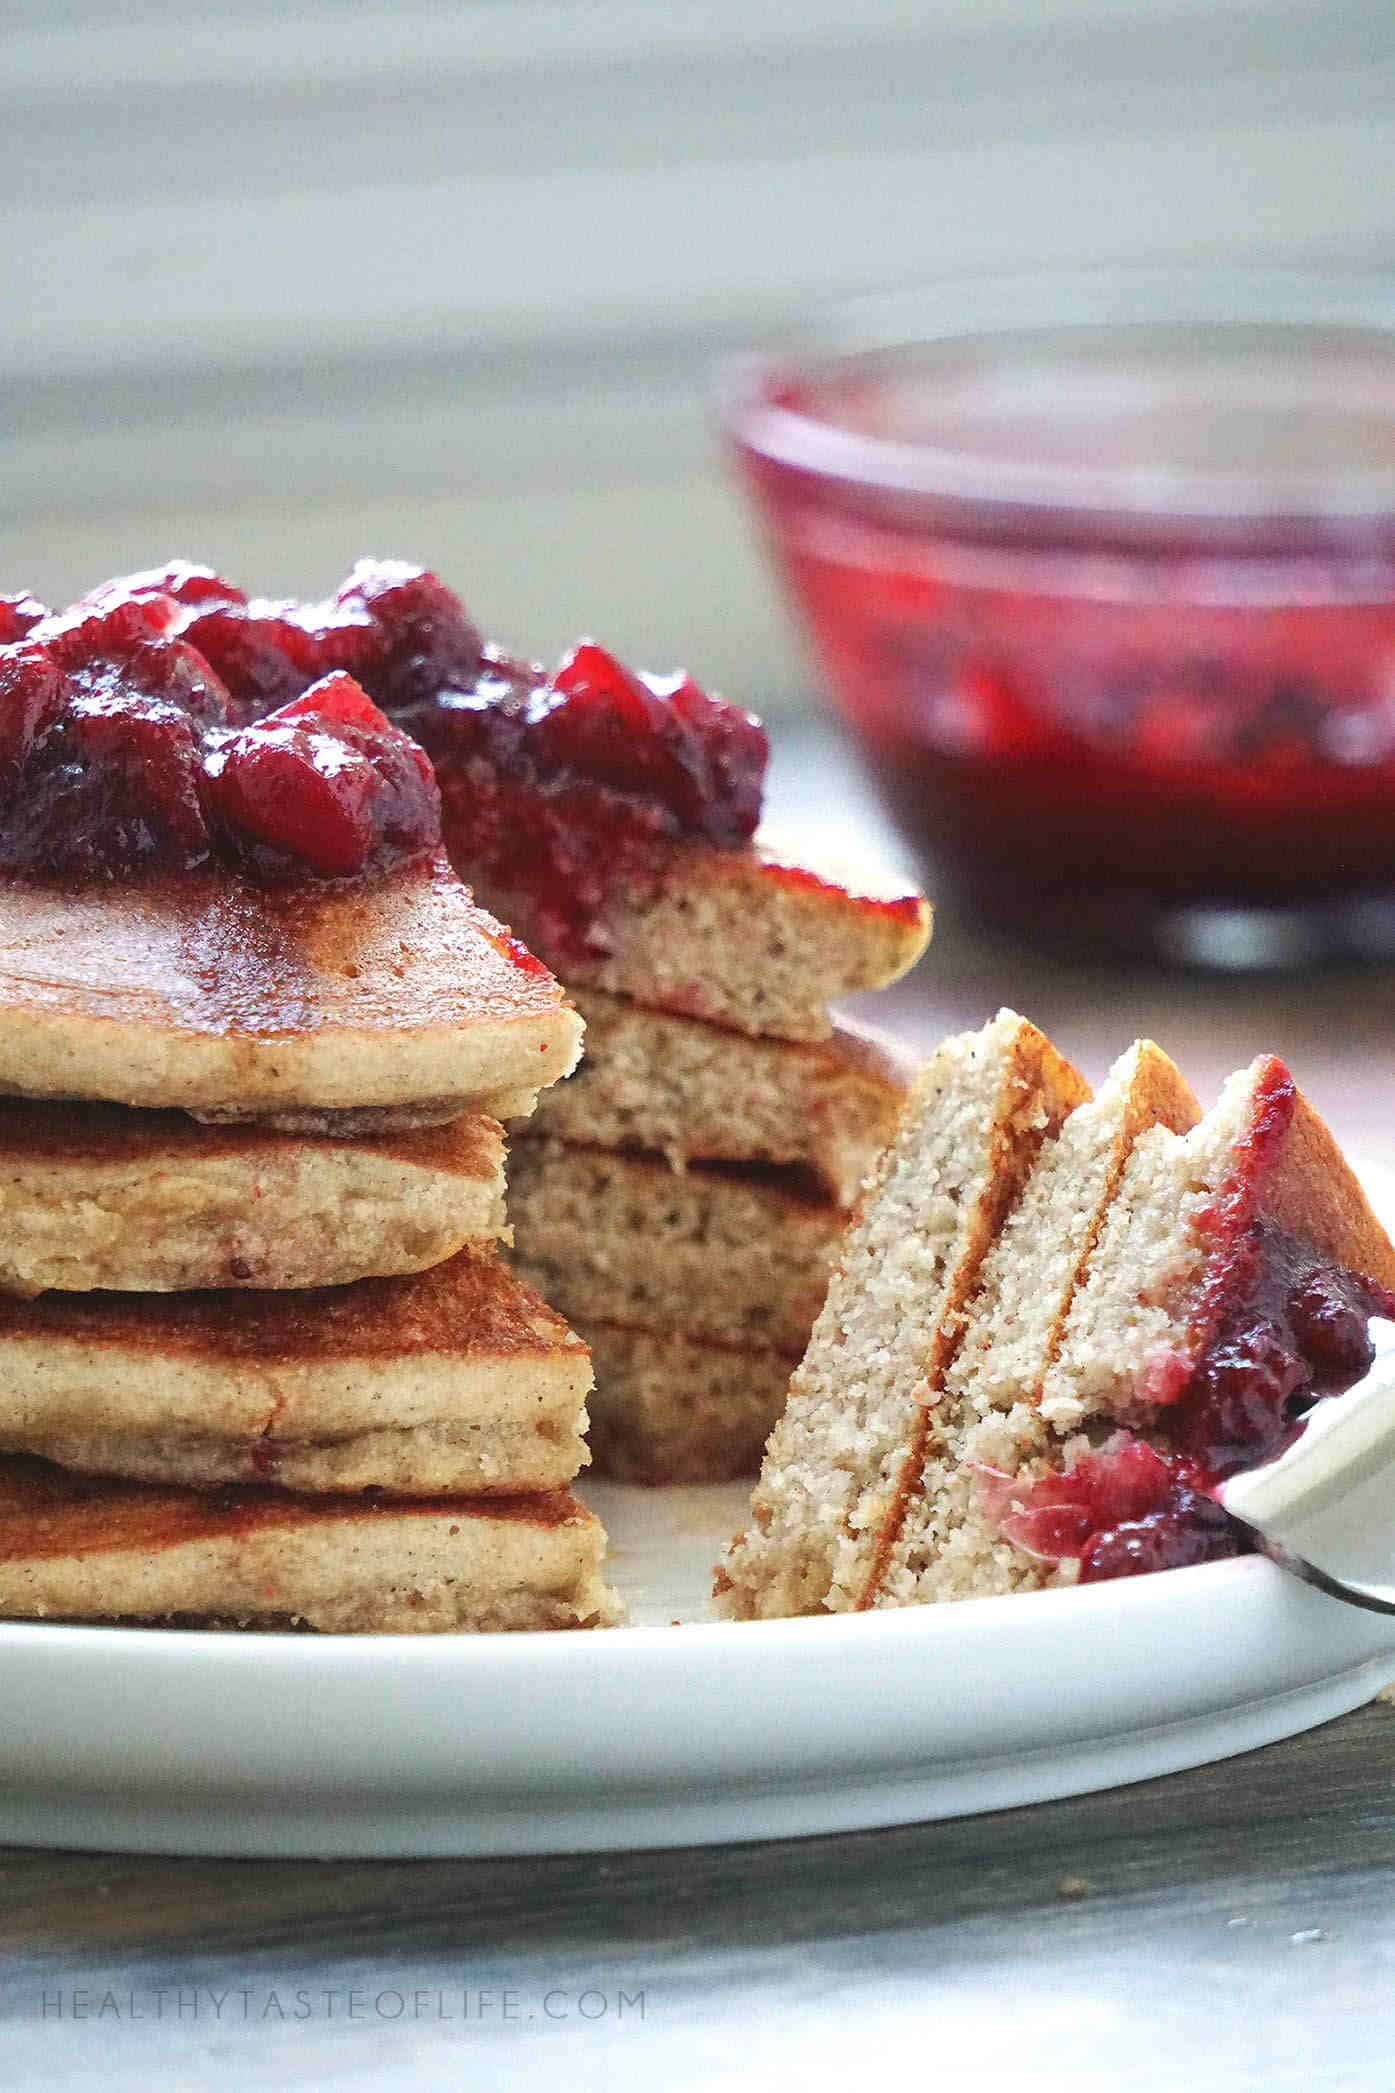 Healthy Gluten Free Sourdough Pancakes or Sorghum Pancakes Made soft and fluffy inside.